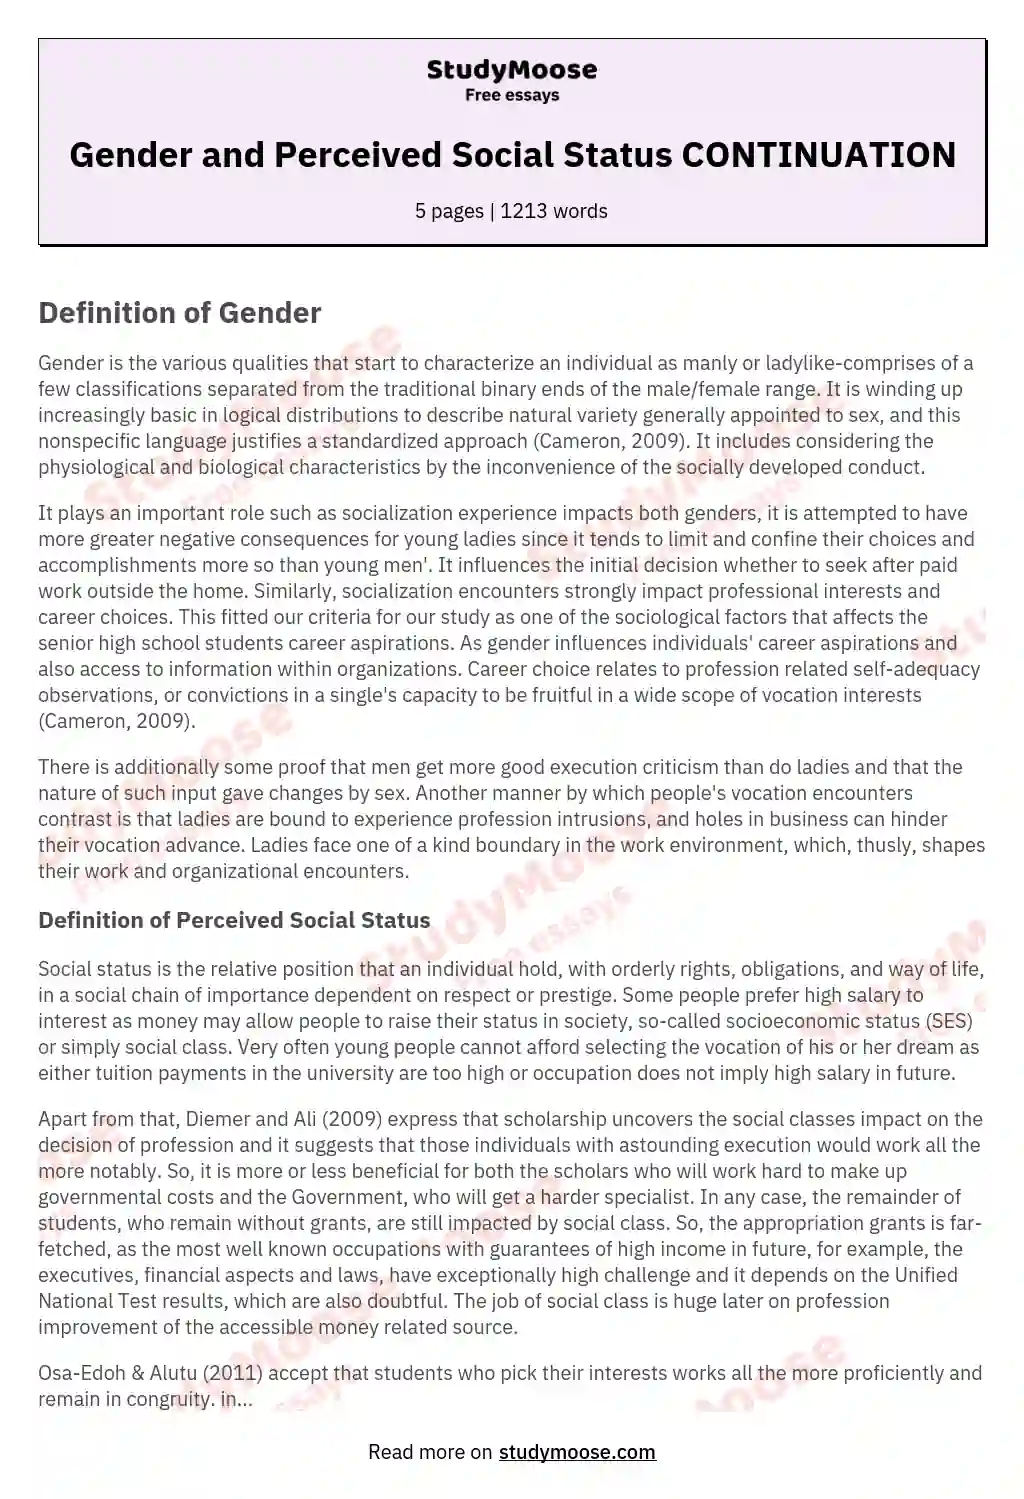 Gender and Perceived Social Status CONTINUATION